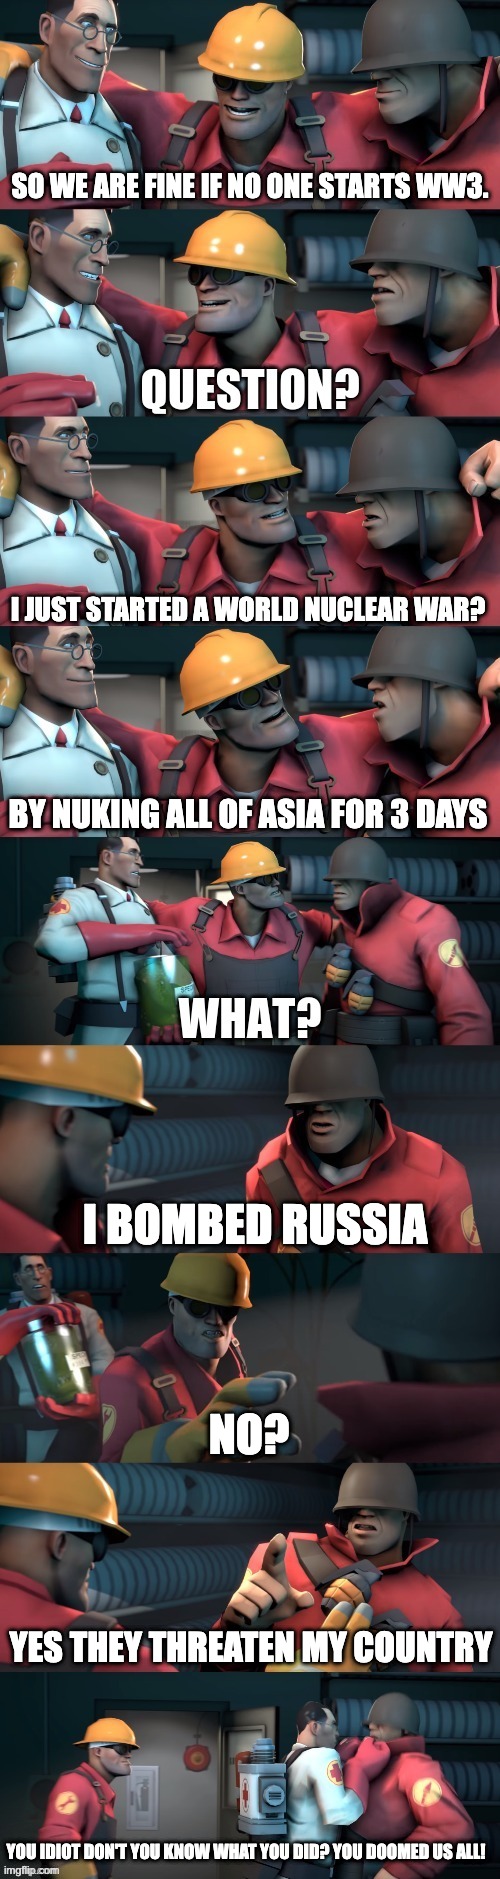 #69 We are doomed | SO WE ARE FINE IF NO ONE STARTS WW3. I JUST STARTED A WORLD NUCLEAR WAR? BY NUKING ALL OF ASIA FOR 3 DAYS; I BOMBED RUSSIA; NO? YES THEY THREATEN MY COUNTRY; YOU IDIOT DON'T YOU KNOW WHAT YOU DID? YOU DOOMED US ALL! | image tagged in tf2 teleport bread meme english | made w/ Imgflip meme maker